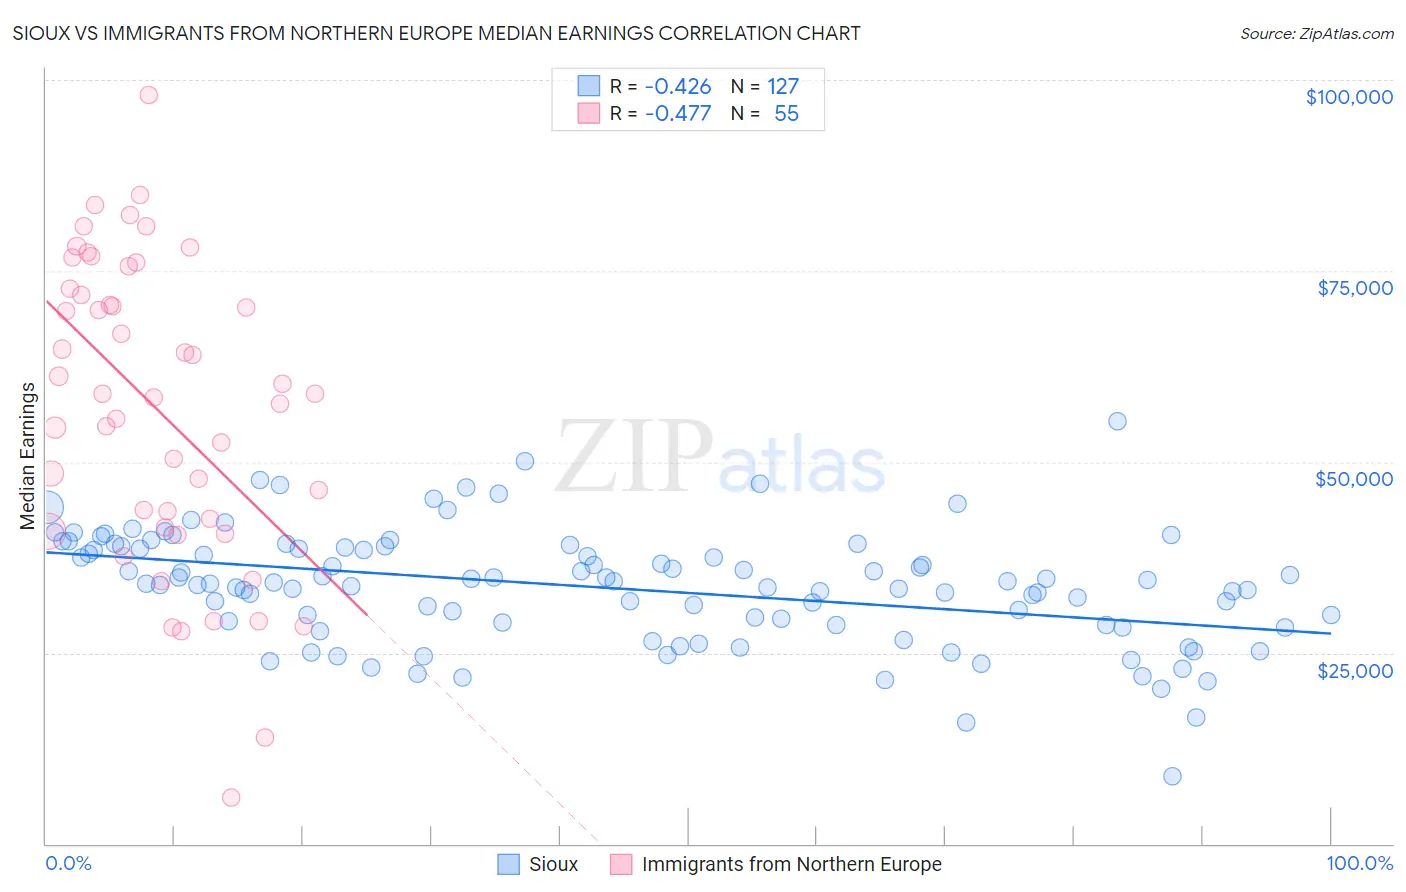 Sioux vs Immigrants from Northern Europe Median Earnings